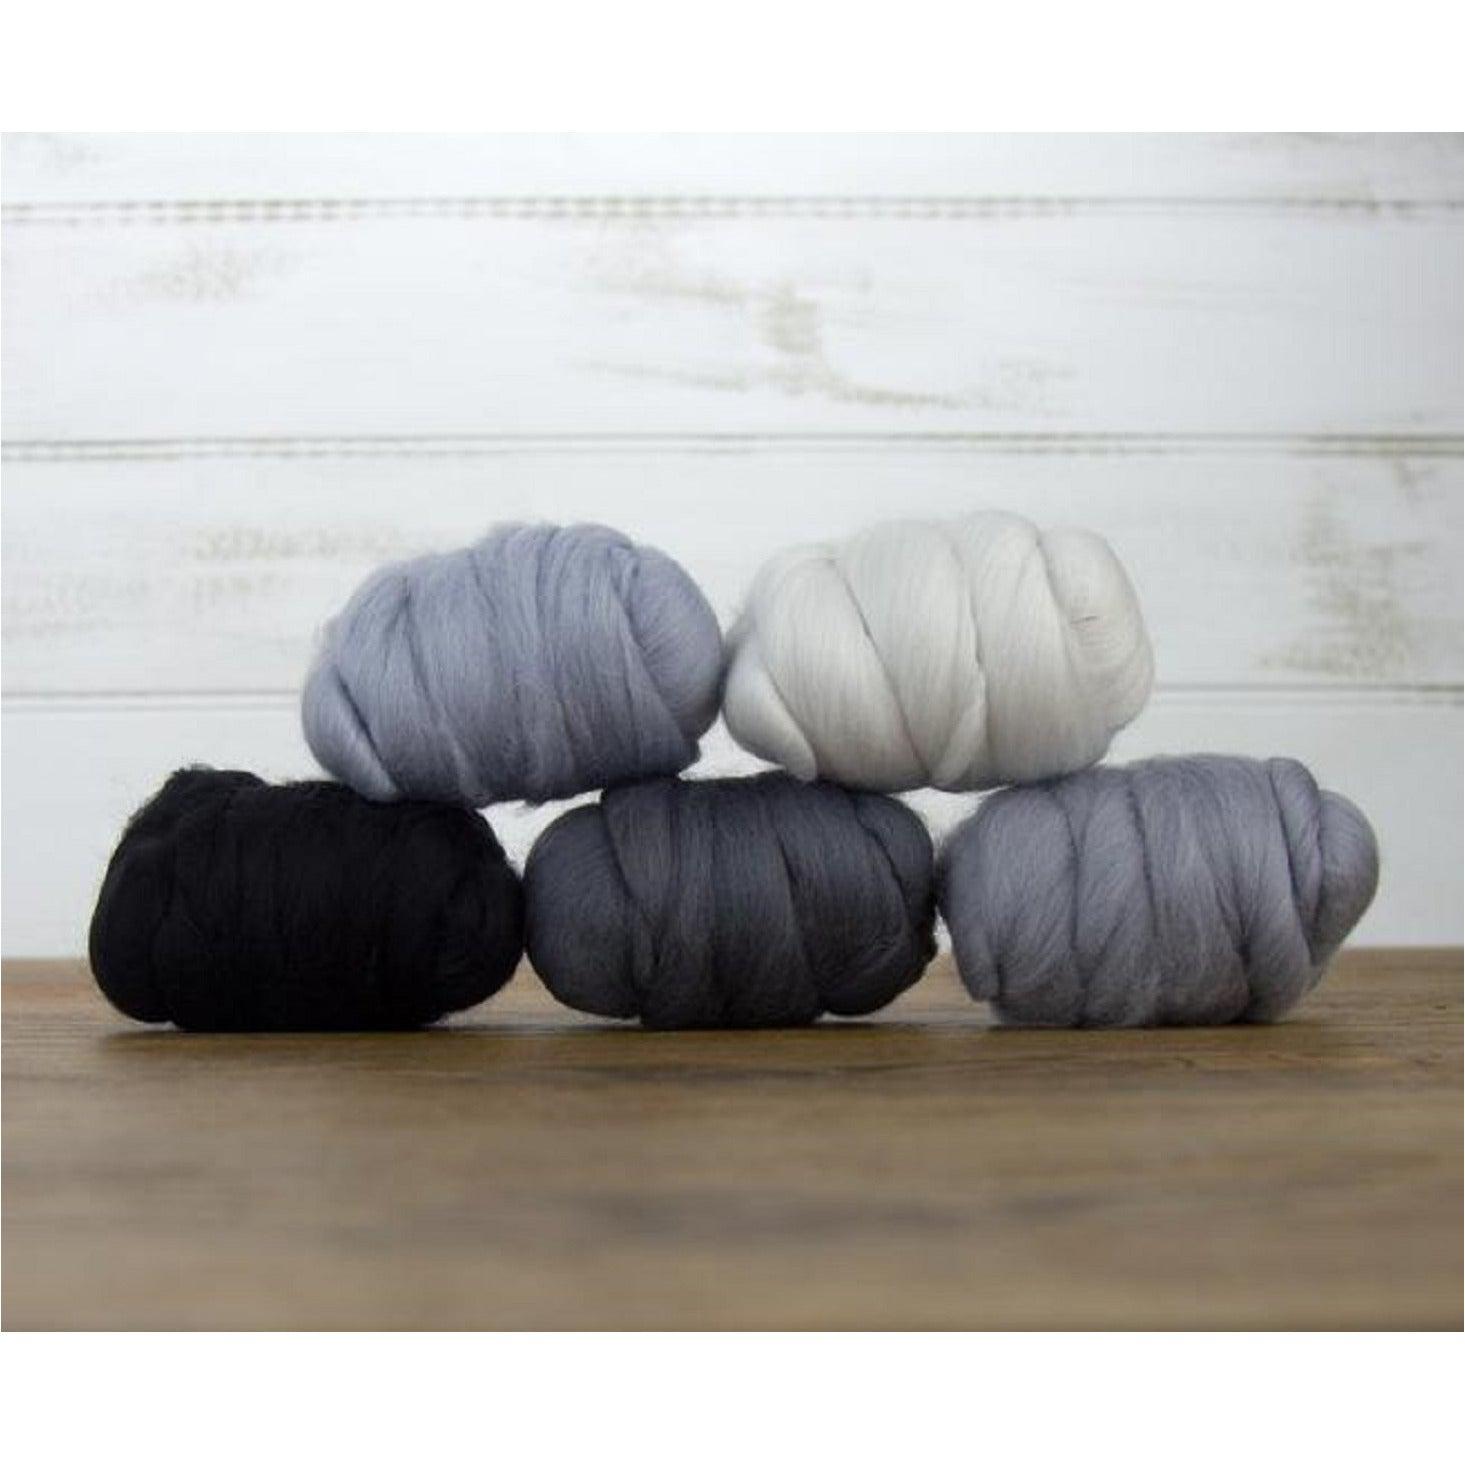 Mixed Merino Wool Variety Pack | Hazy Gray (Grays) 250 Grams, 23 Micron - Textile Indie 